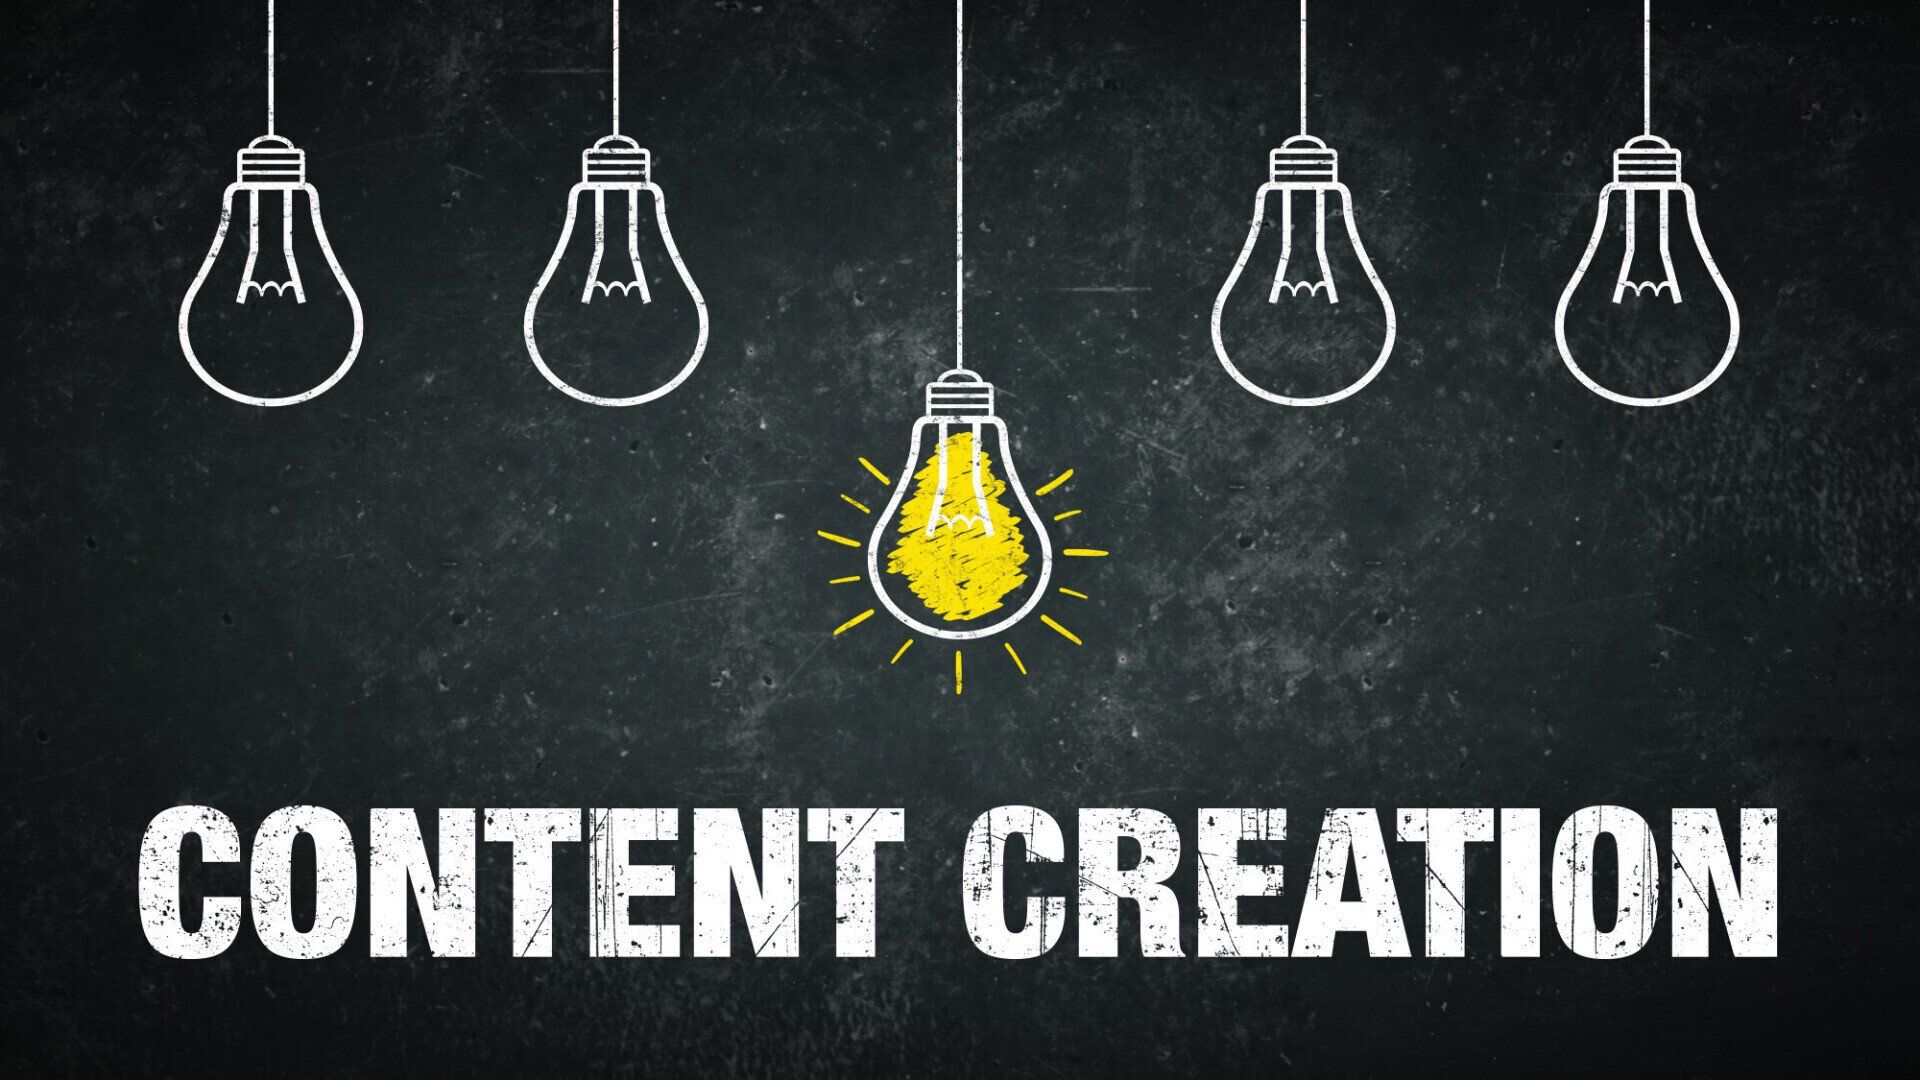 9 Tips on Creating Content Marketing Campaigns for Small Businesses